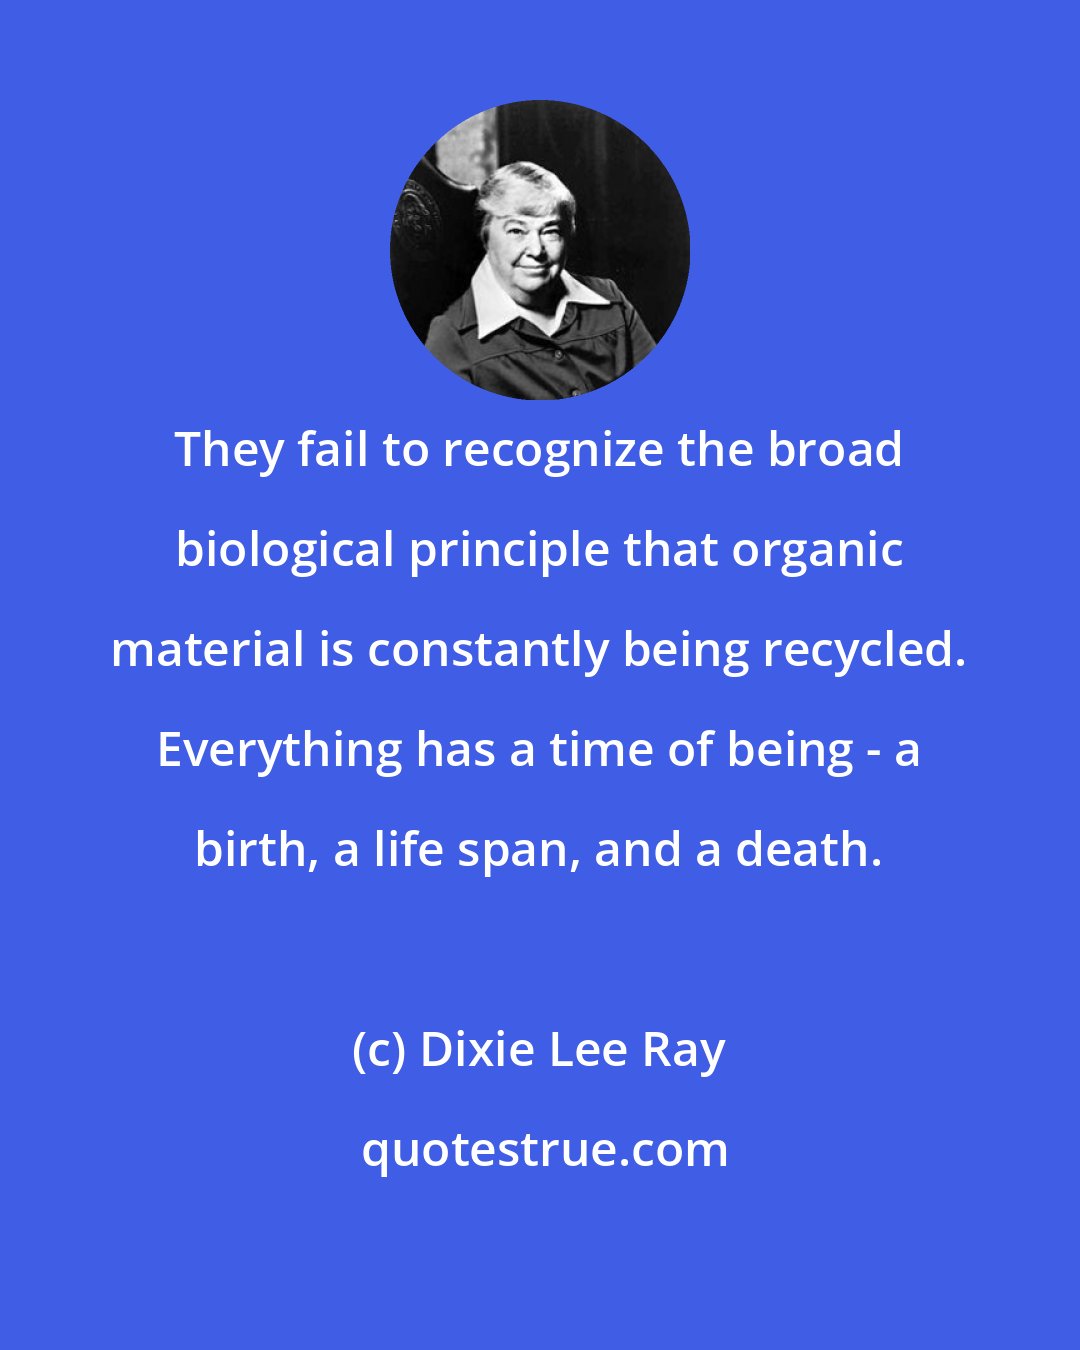 Dixie Lee Ray: They fail to recognize the broad biological principle that organic material is constantly being recycled. Everything has a time of being - a birth, a life span, and a death.